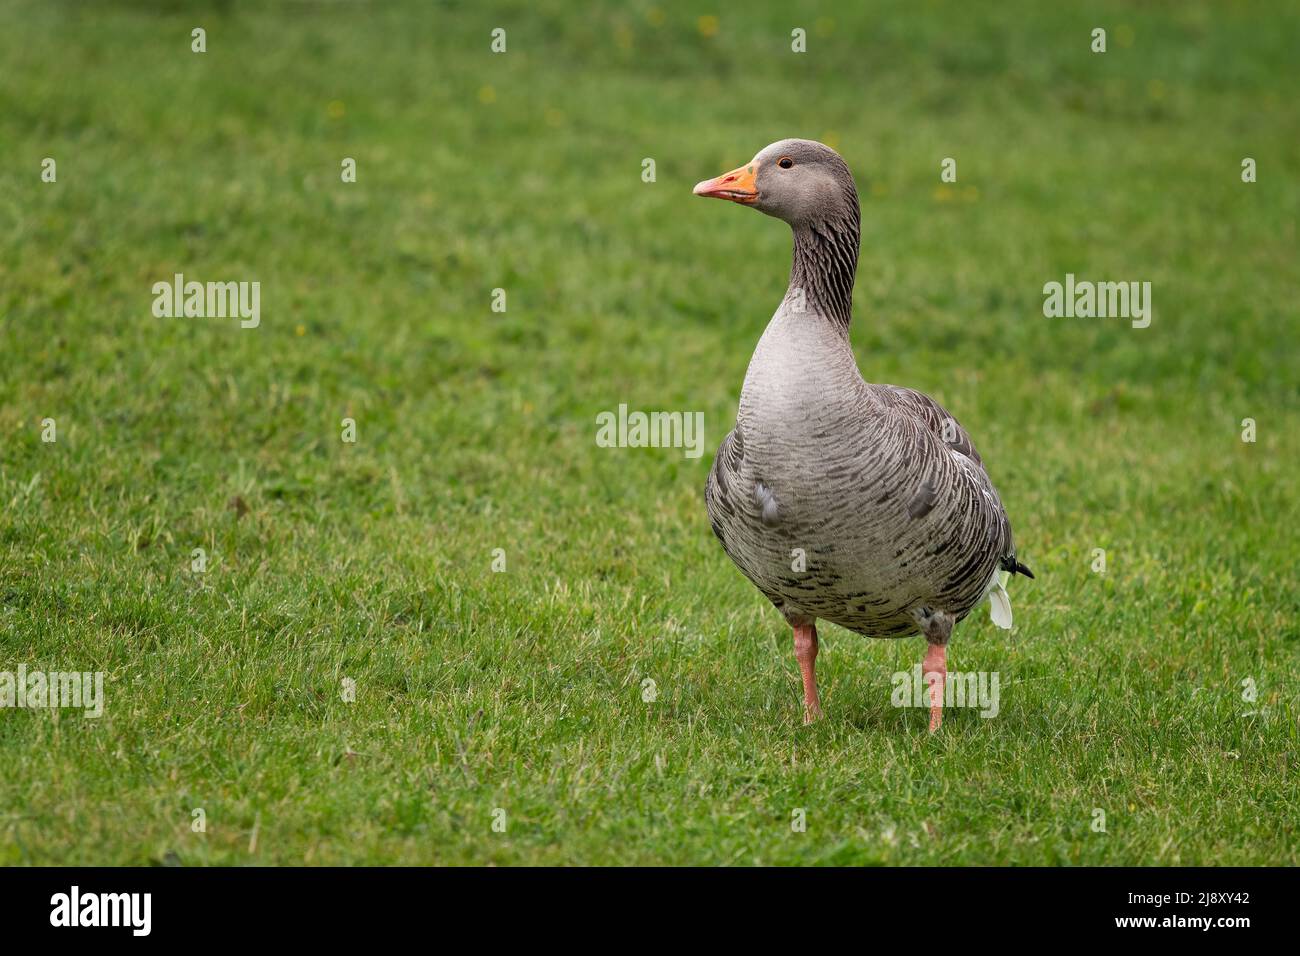 A greylag, graylag, goose, anser anser, standing upright on a grass field Stock Photo